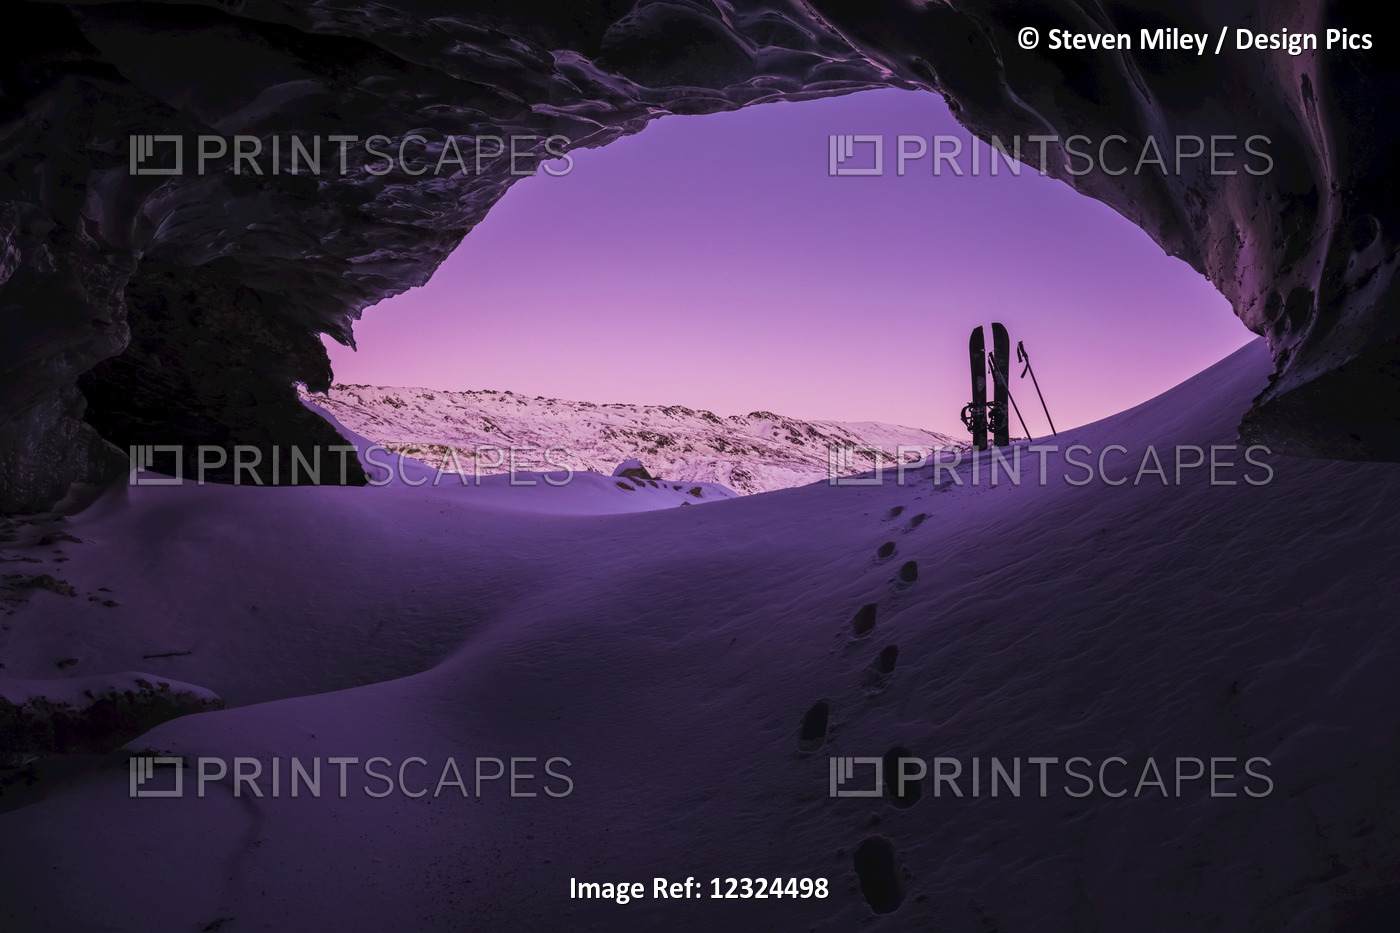 Footprints Lead Toward A Splitboard Placed At The Entrance Of An Ice Cave ...